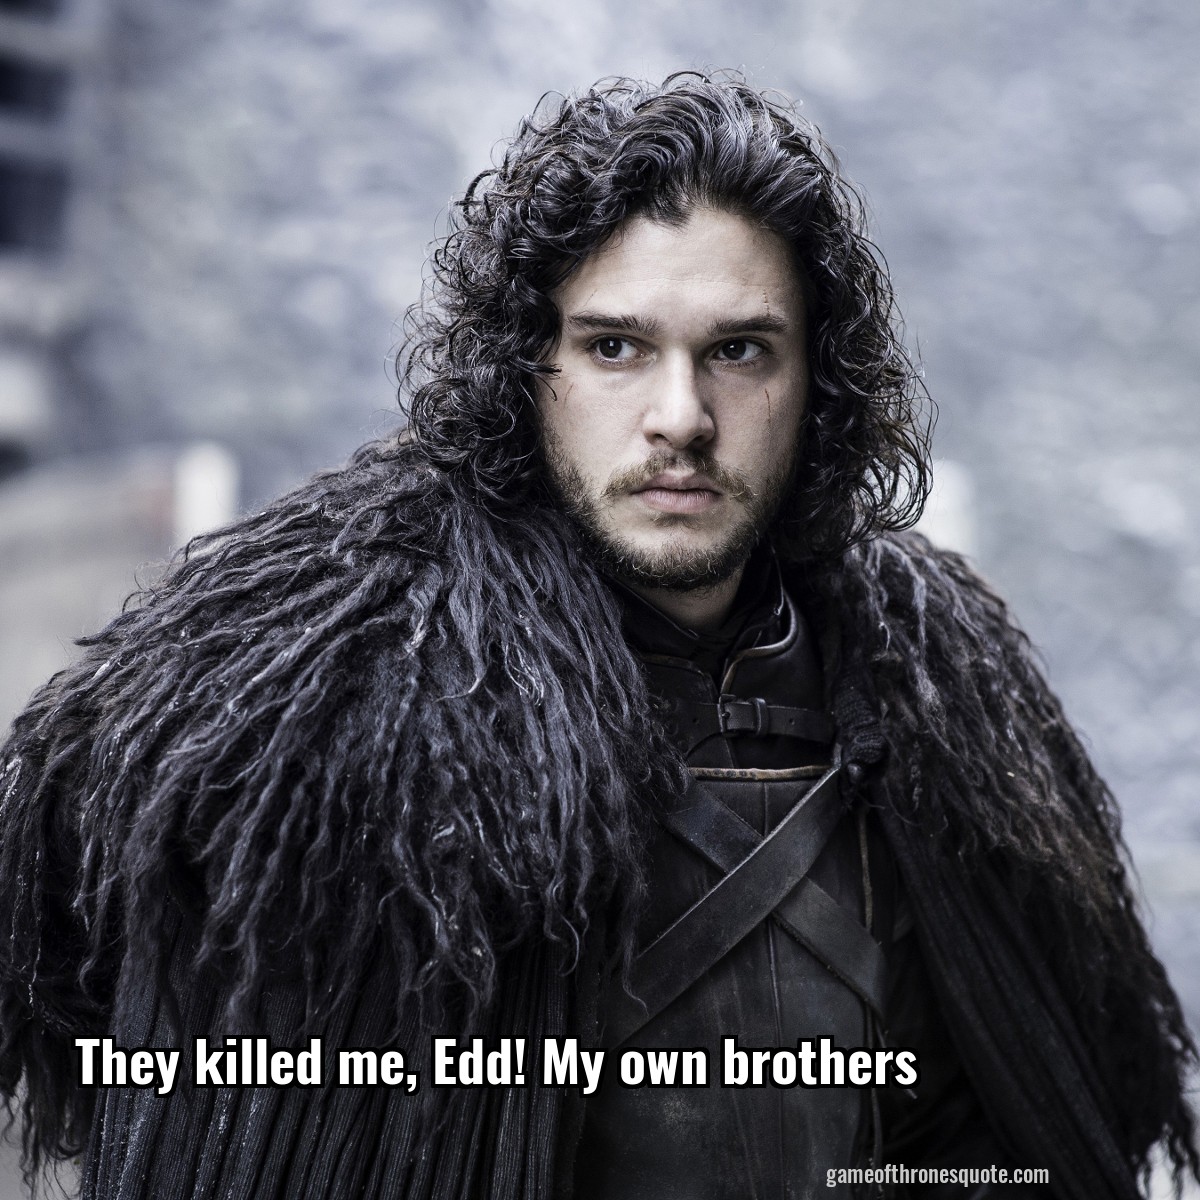 They killed me, Edd! My own brothers